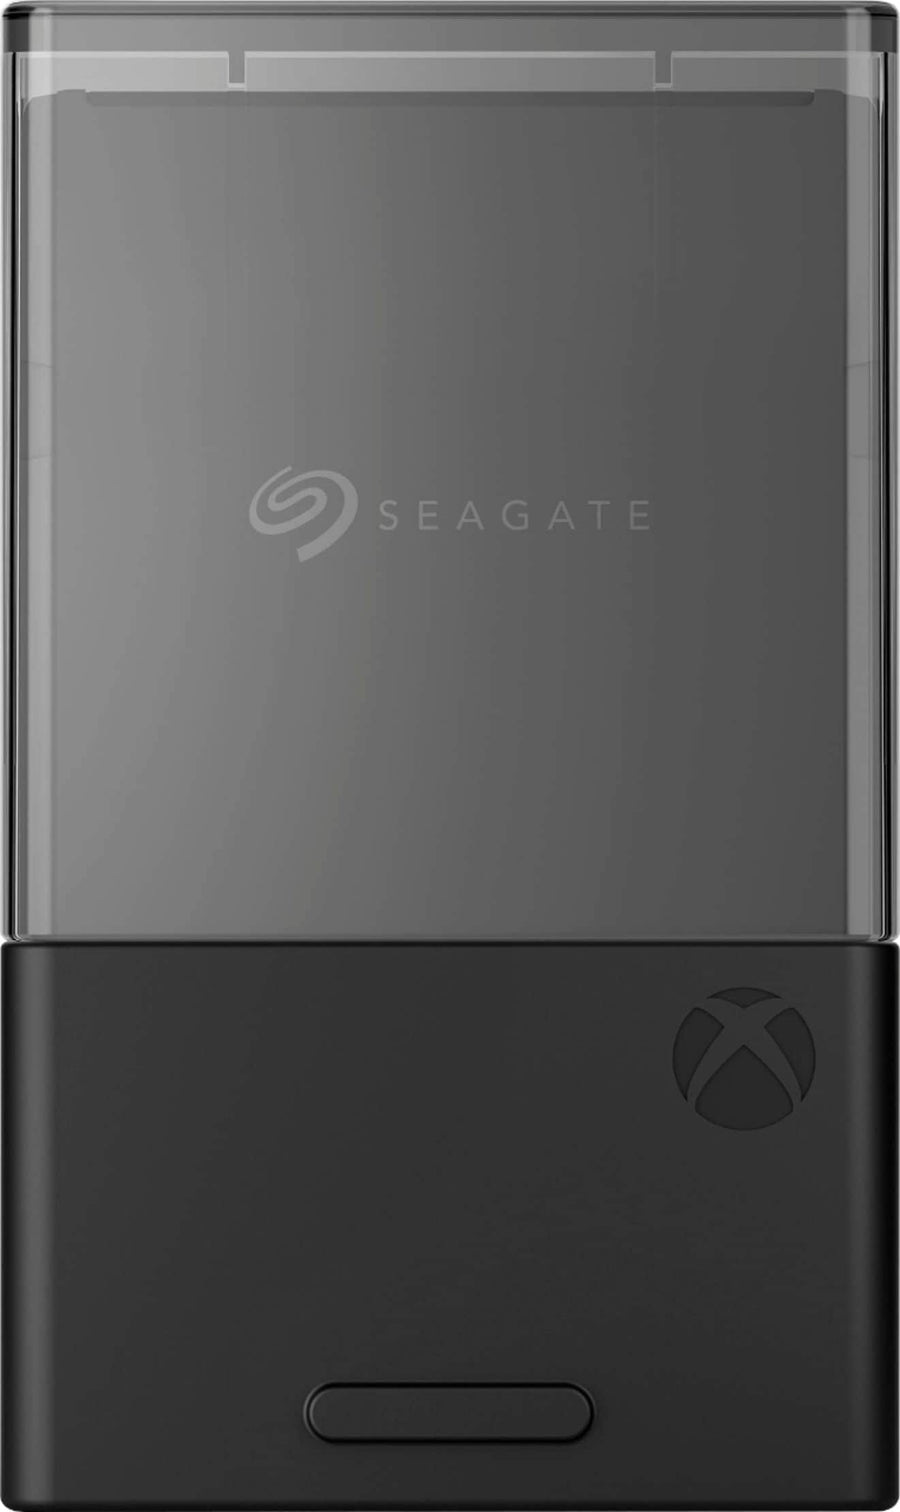 Seagate - 1TB Storage Expansion Card for Xbox Series X|S Internal NVMe SSD - Black_0